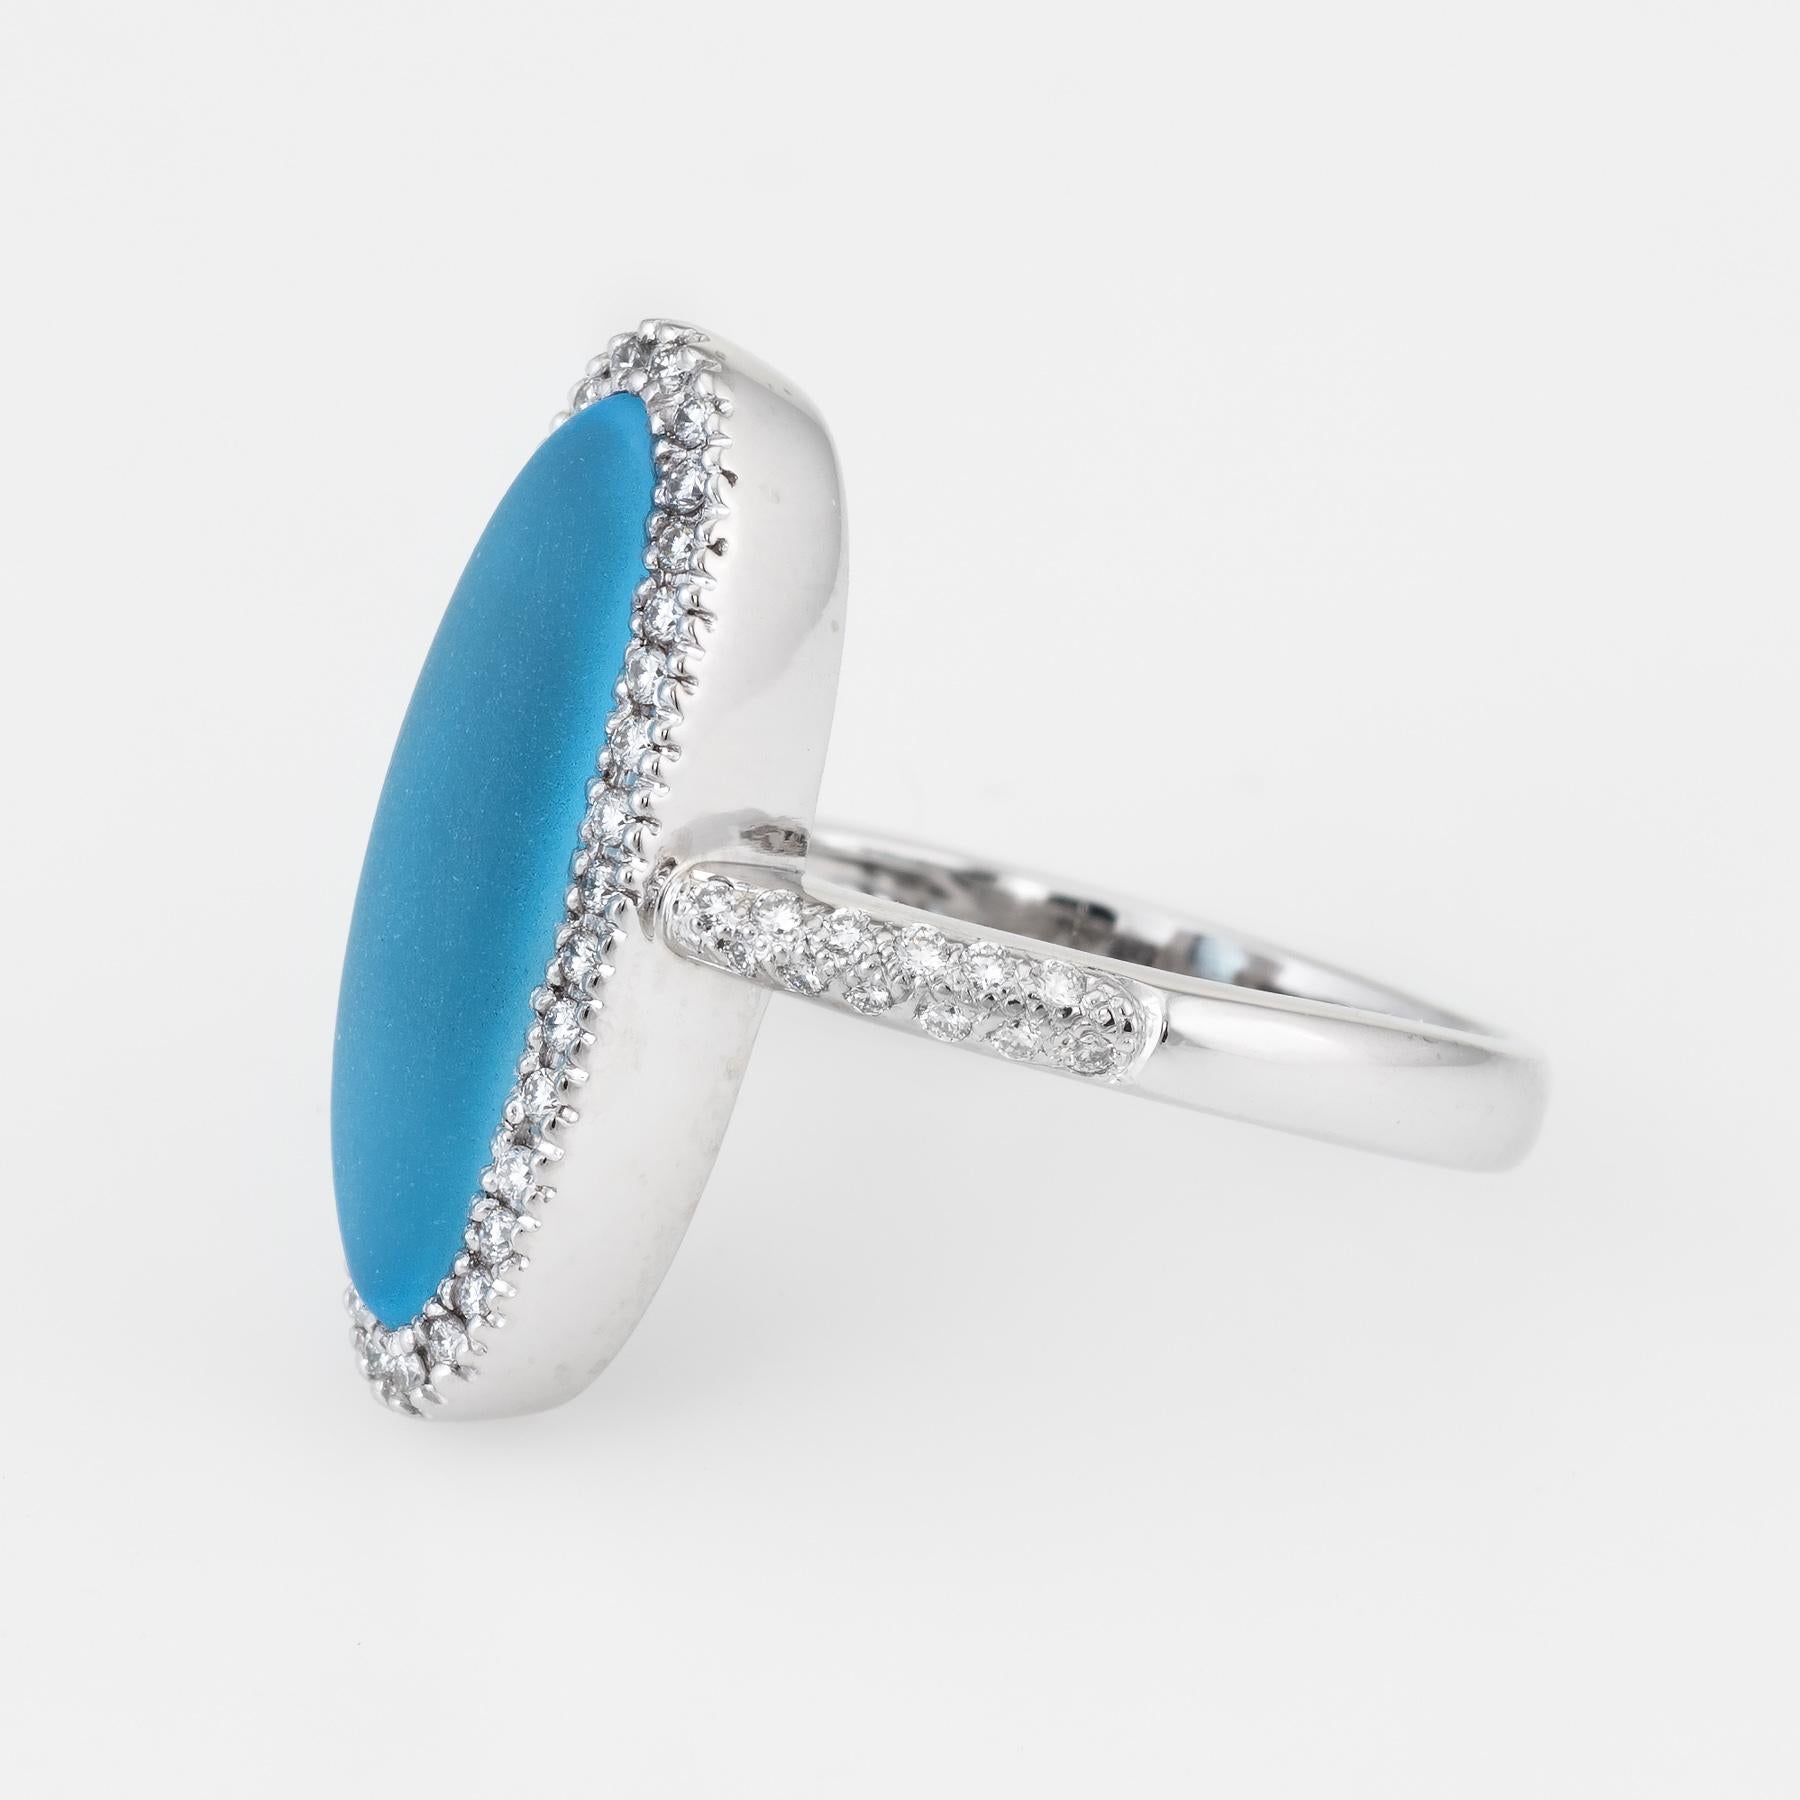 Oval Cut Frosted Blue Topaz Diamond Oval Cocktail Ring Estate 14 Karat White Gold Jewelry